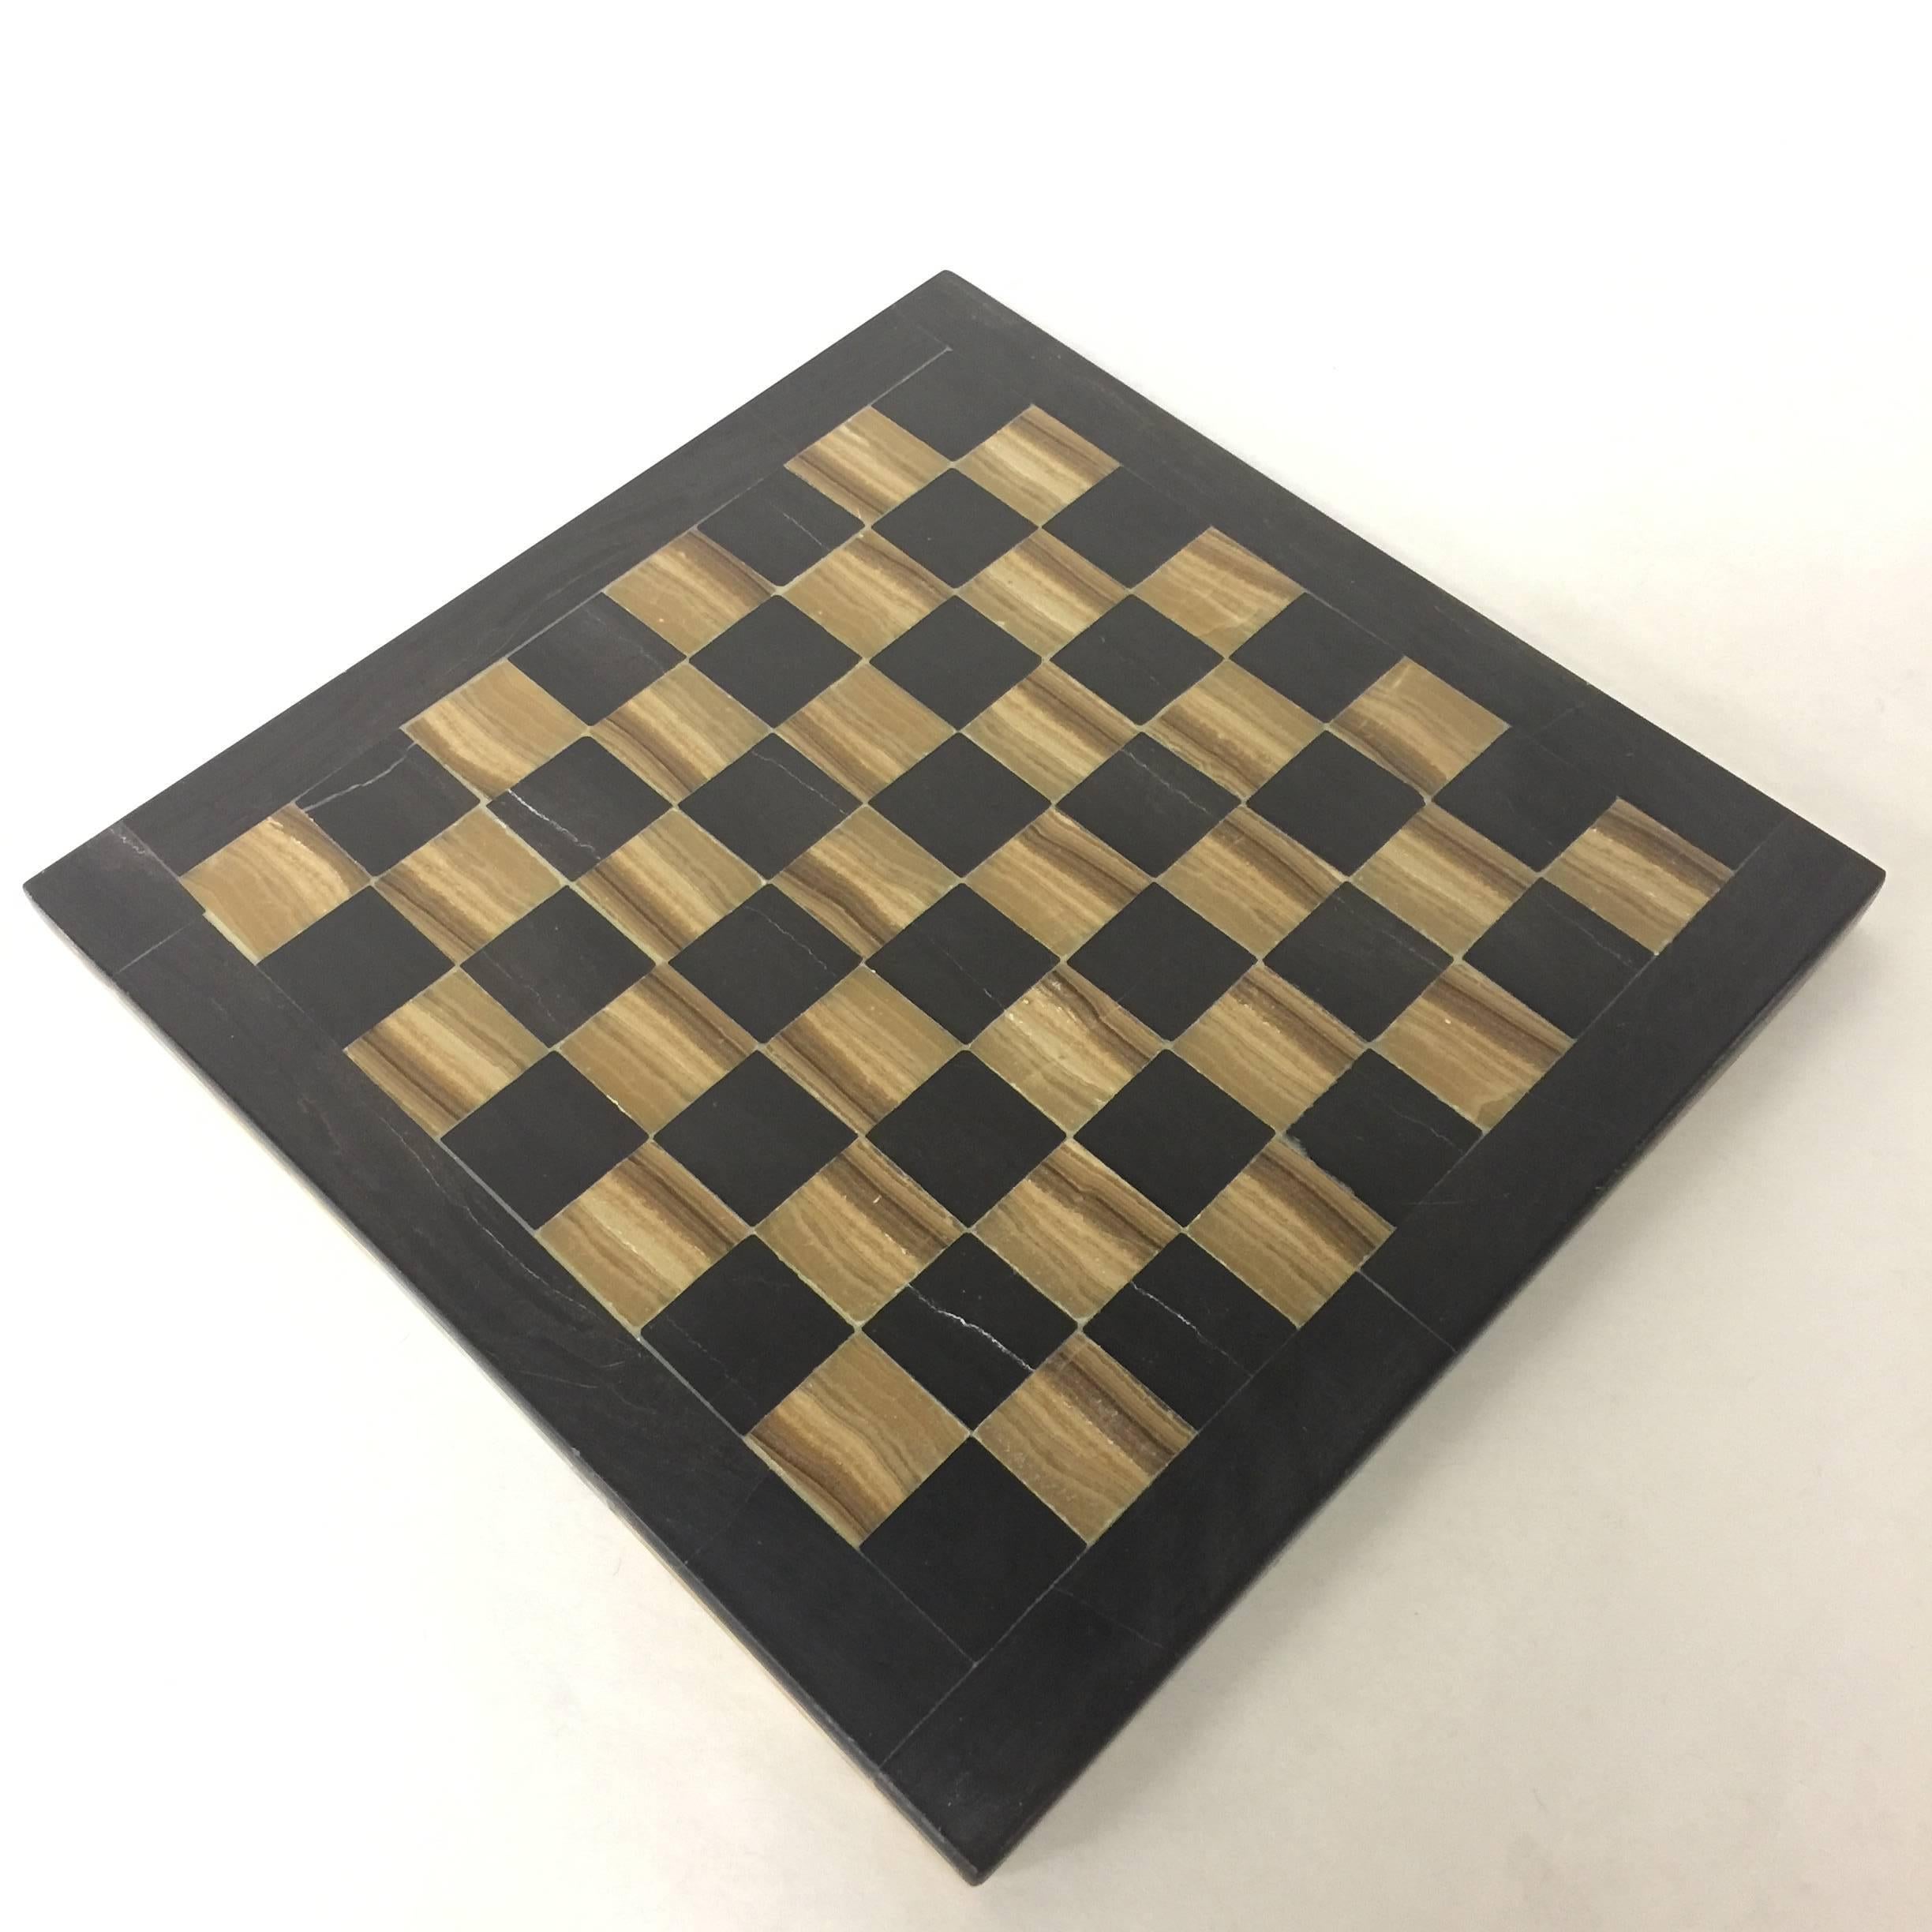 Diminutive Vintage Agate Chess or Checkers Board in Black and Gold, Pieced Side 5